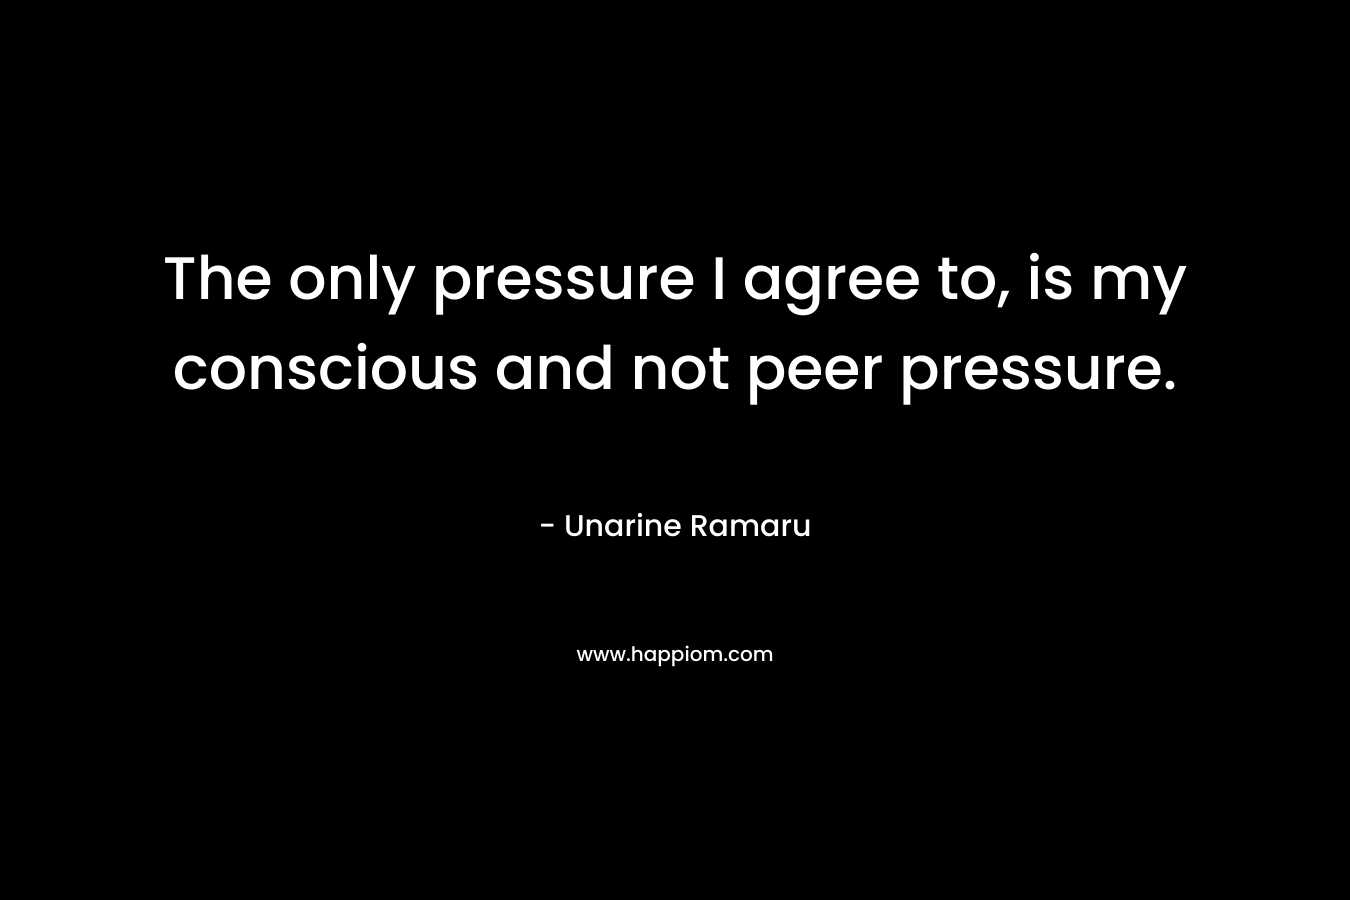 The only pressure I agree to, is my conscious and not peer pressure.